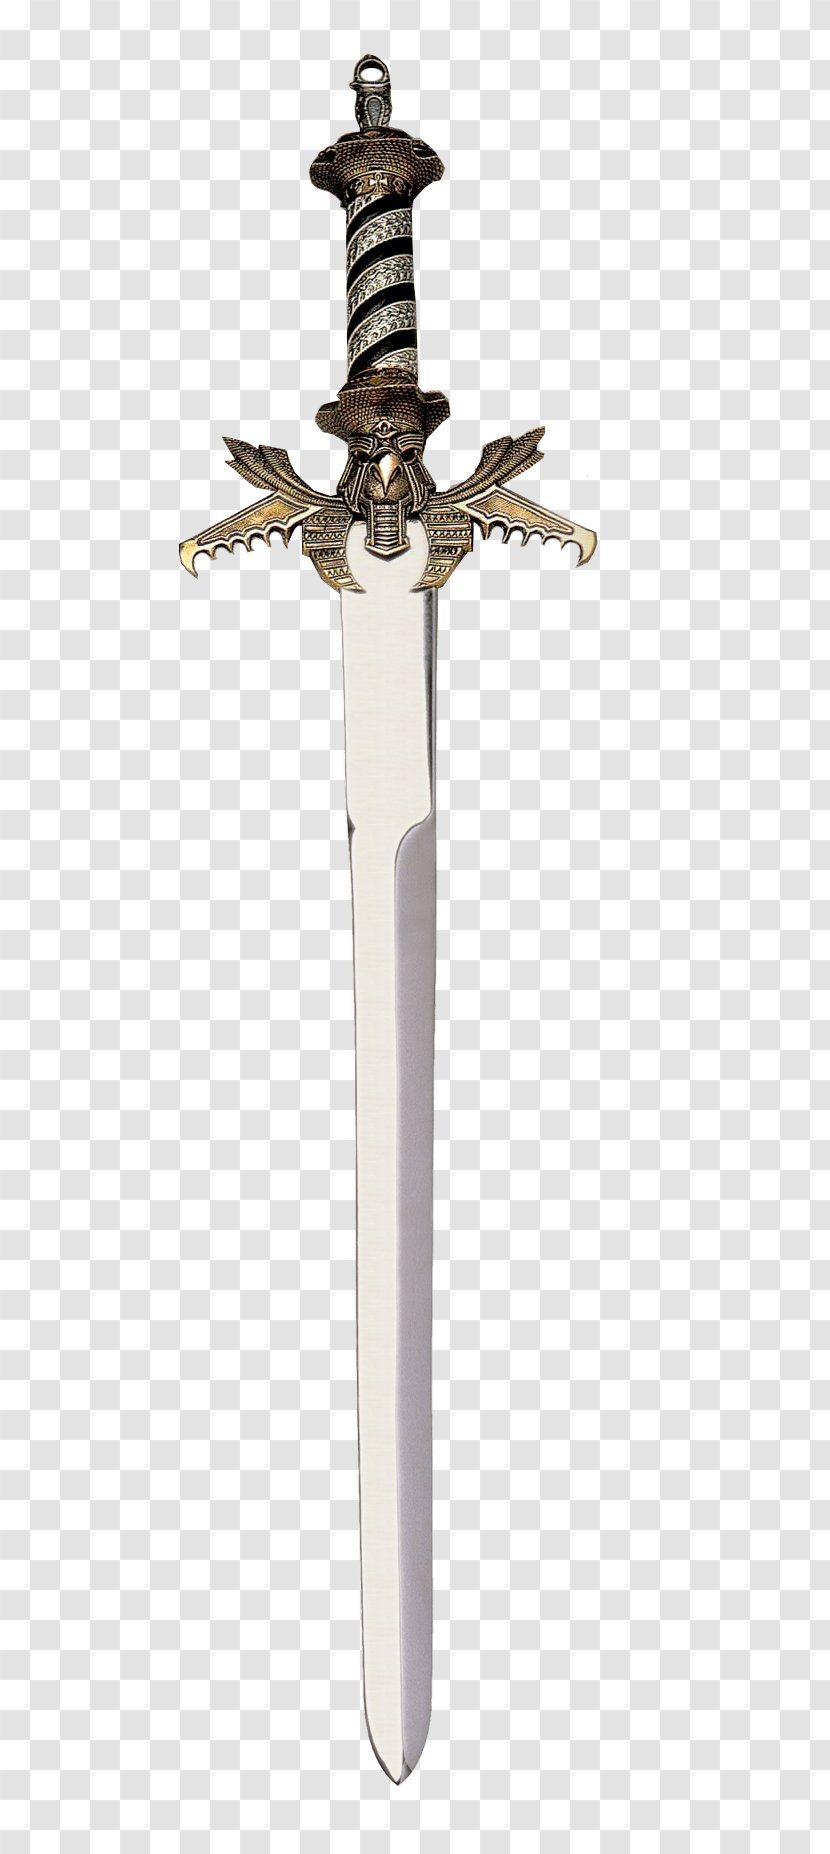 Sword Dagger Clip Art Weapon - Knife - Knightly Transparent PNG